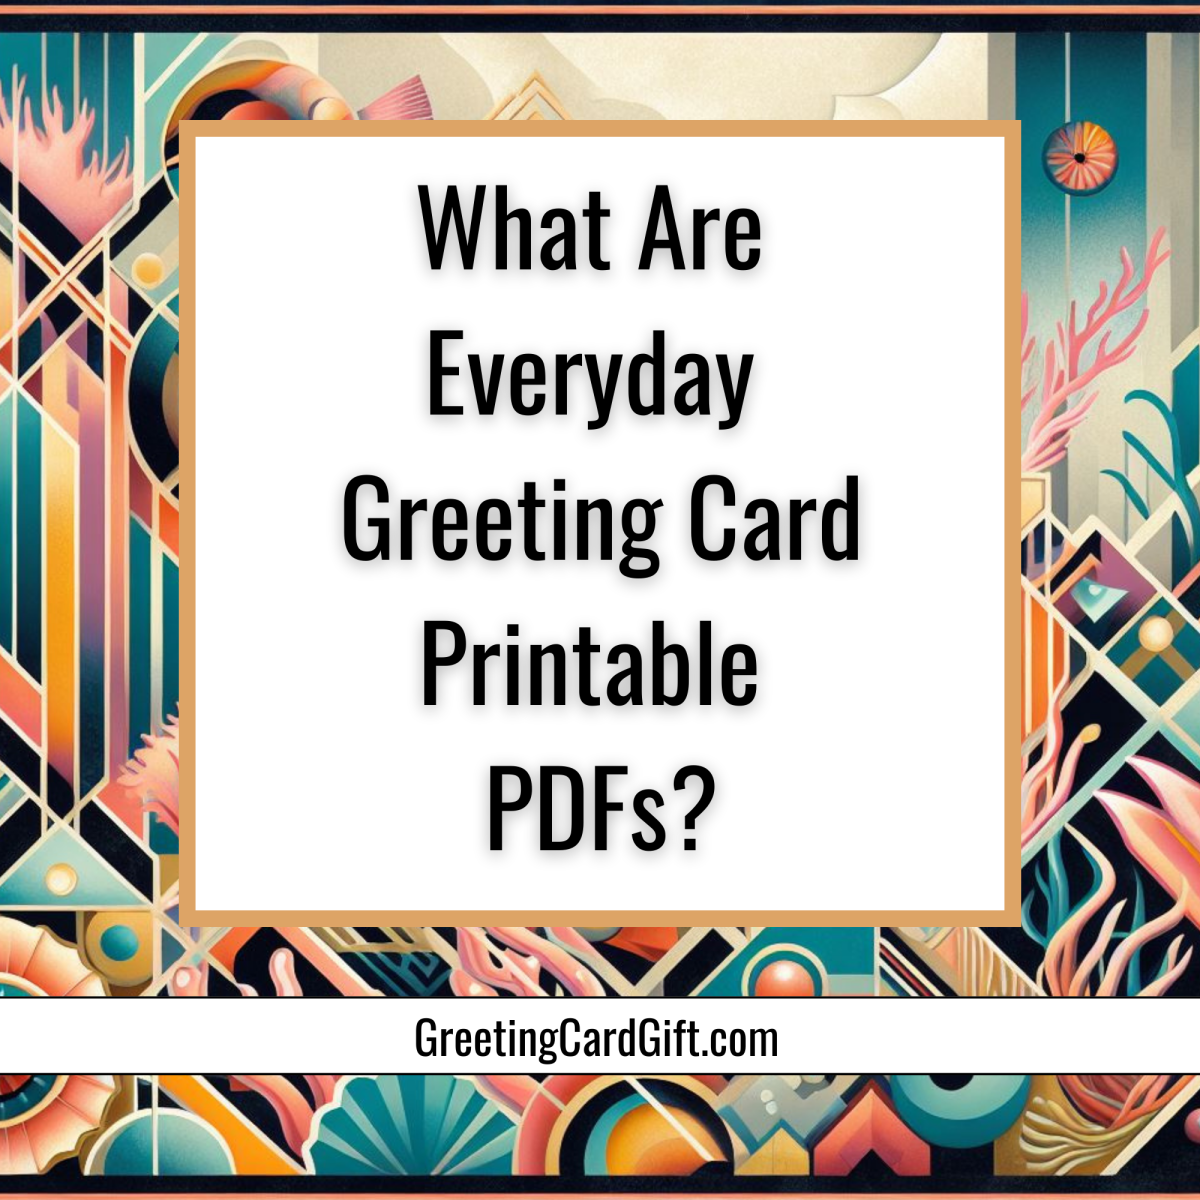 What Are Everyday Greeting Card Printable PDFs?